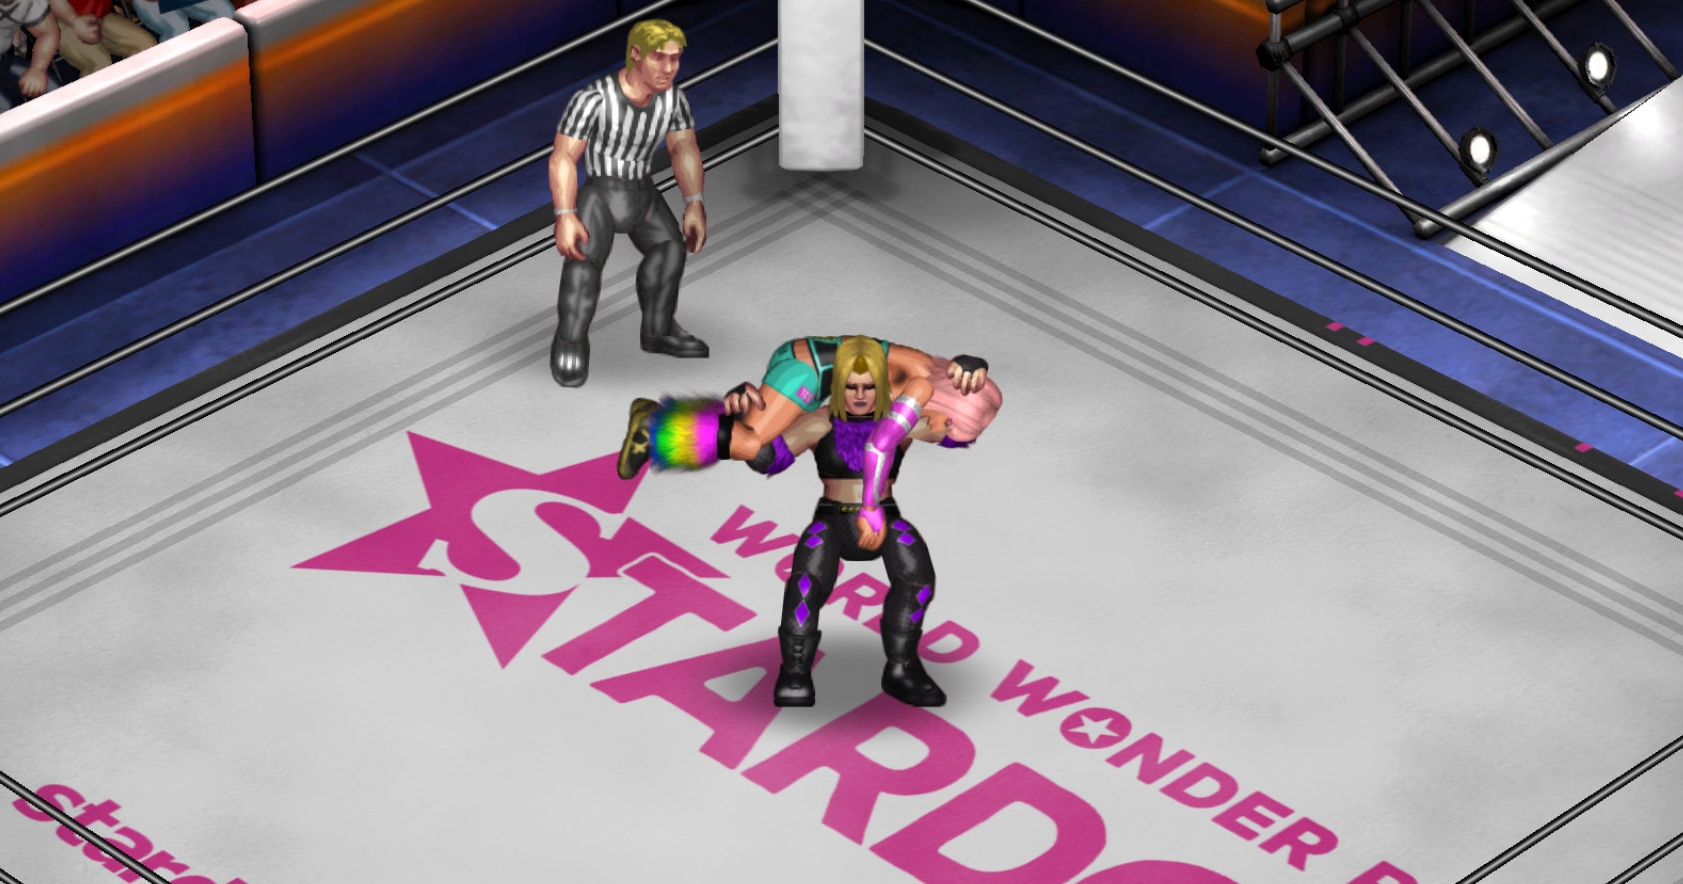 Stardom Wrestlers And Release Date Announced For Upcoming Fire Pro Wrestling World DLC